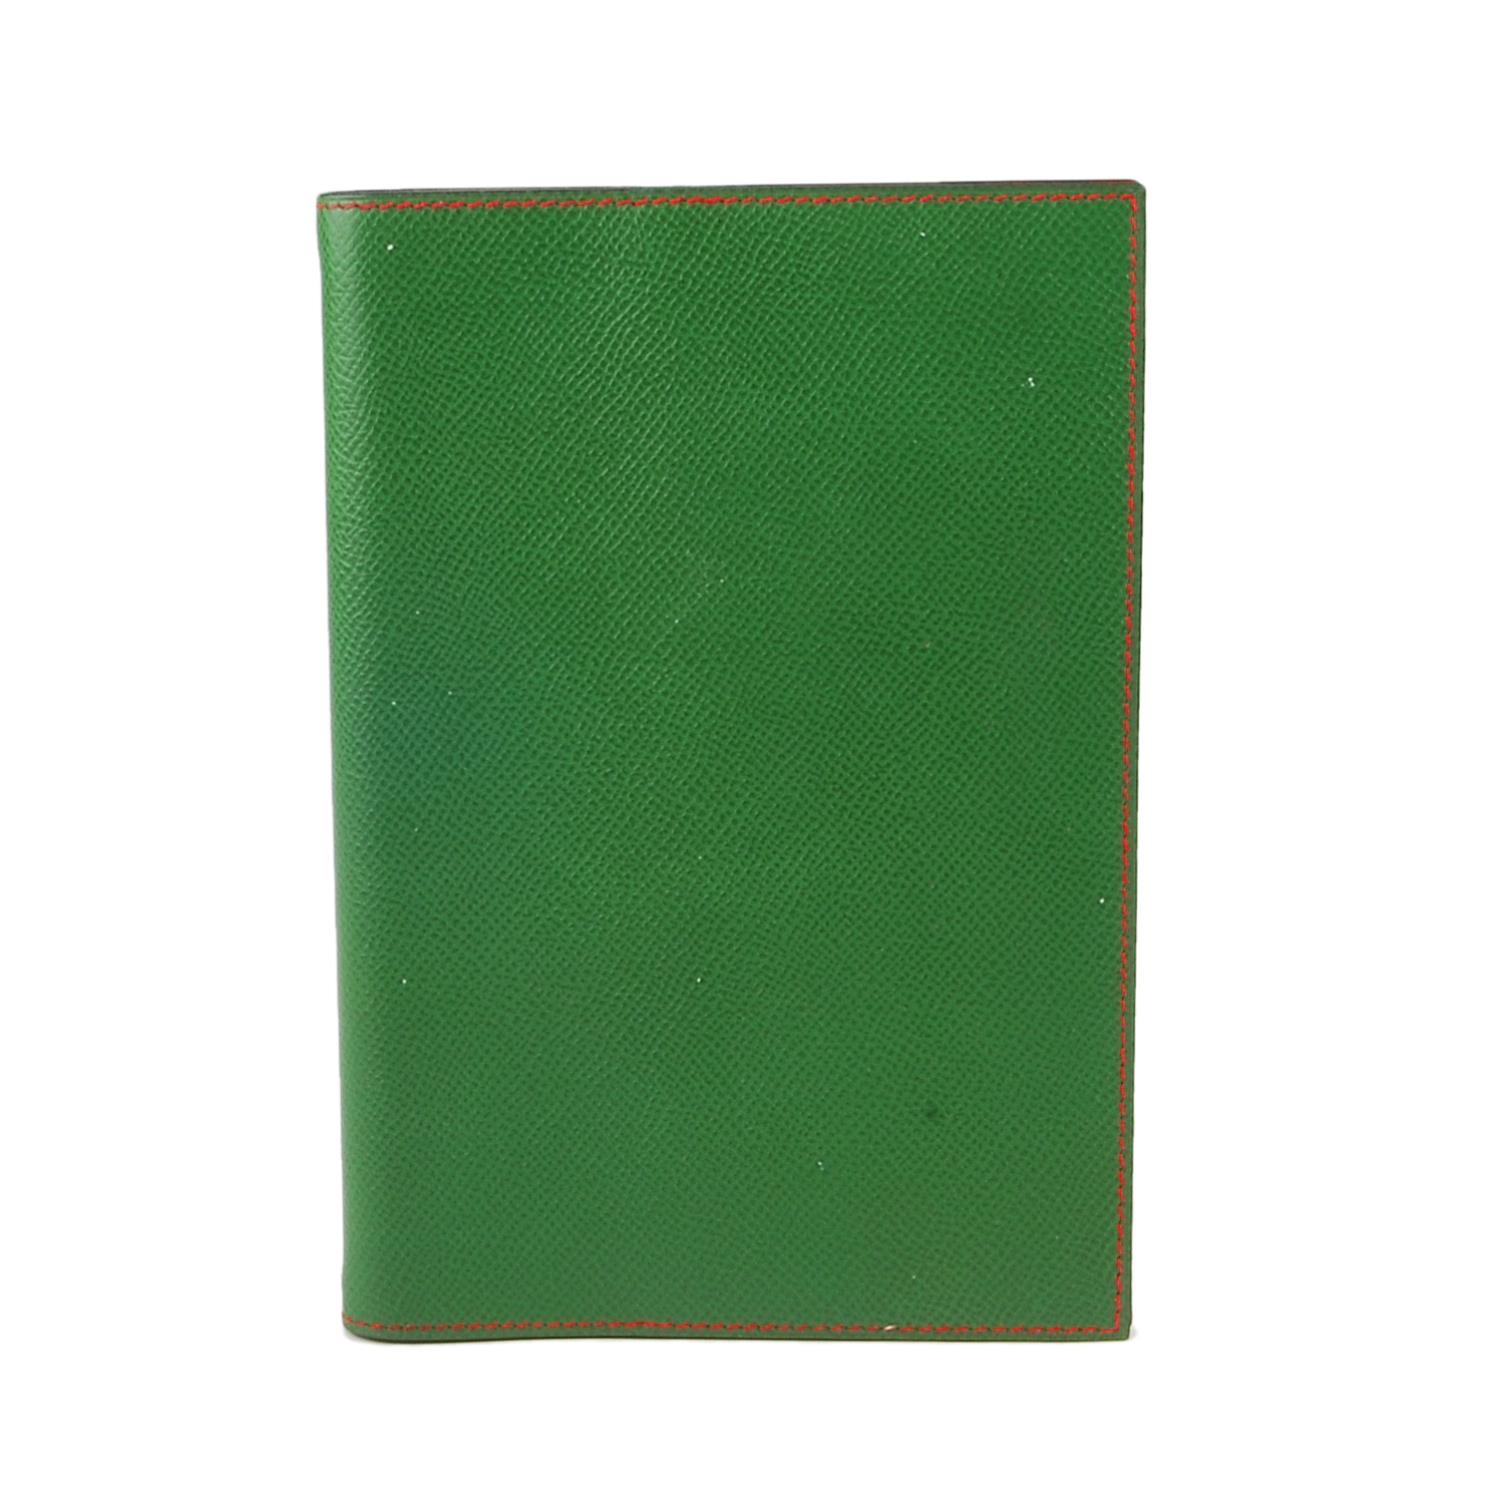 HERMÈS - a two-tone agenda dairy cover. Designed with a green leather exterior and contrasting red